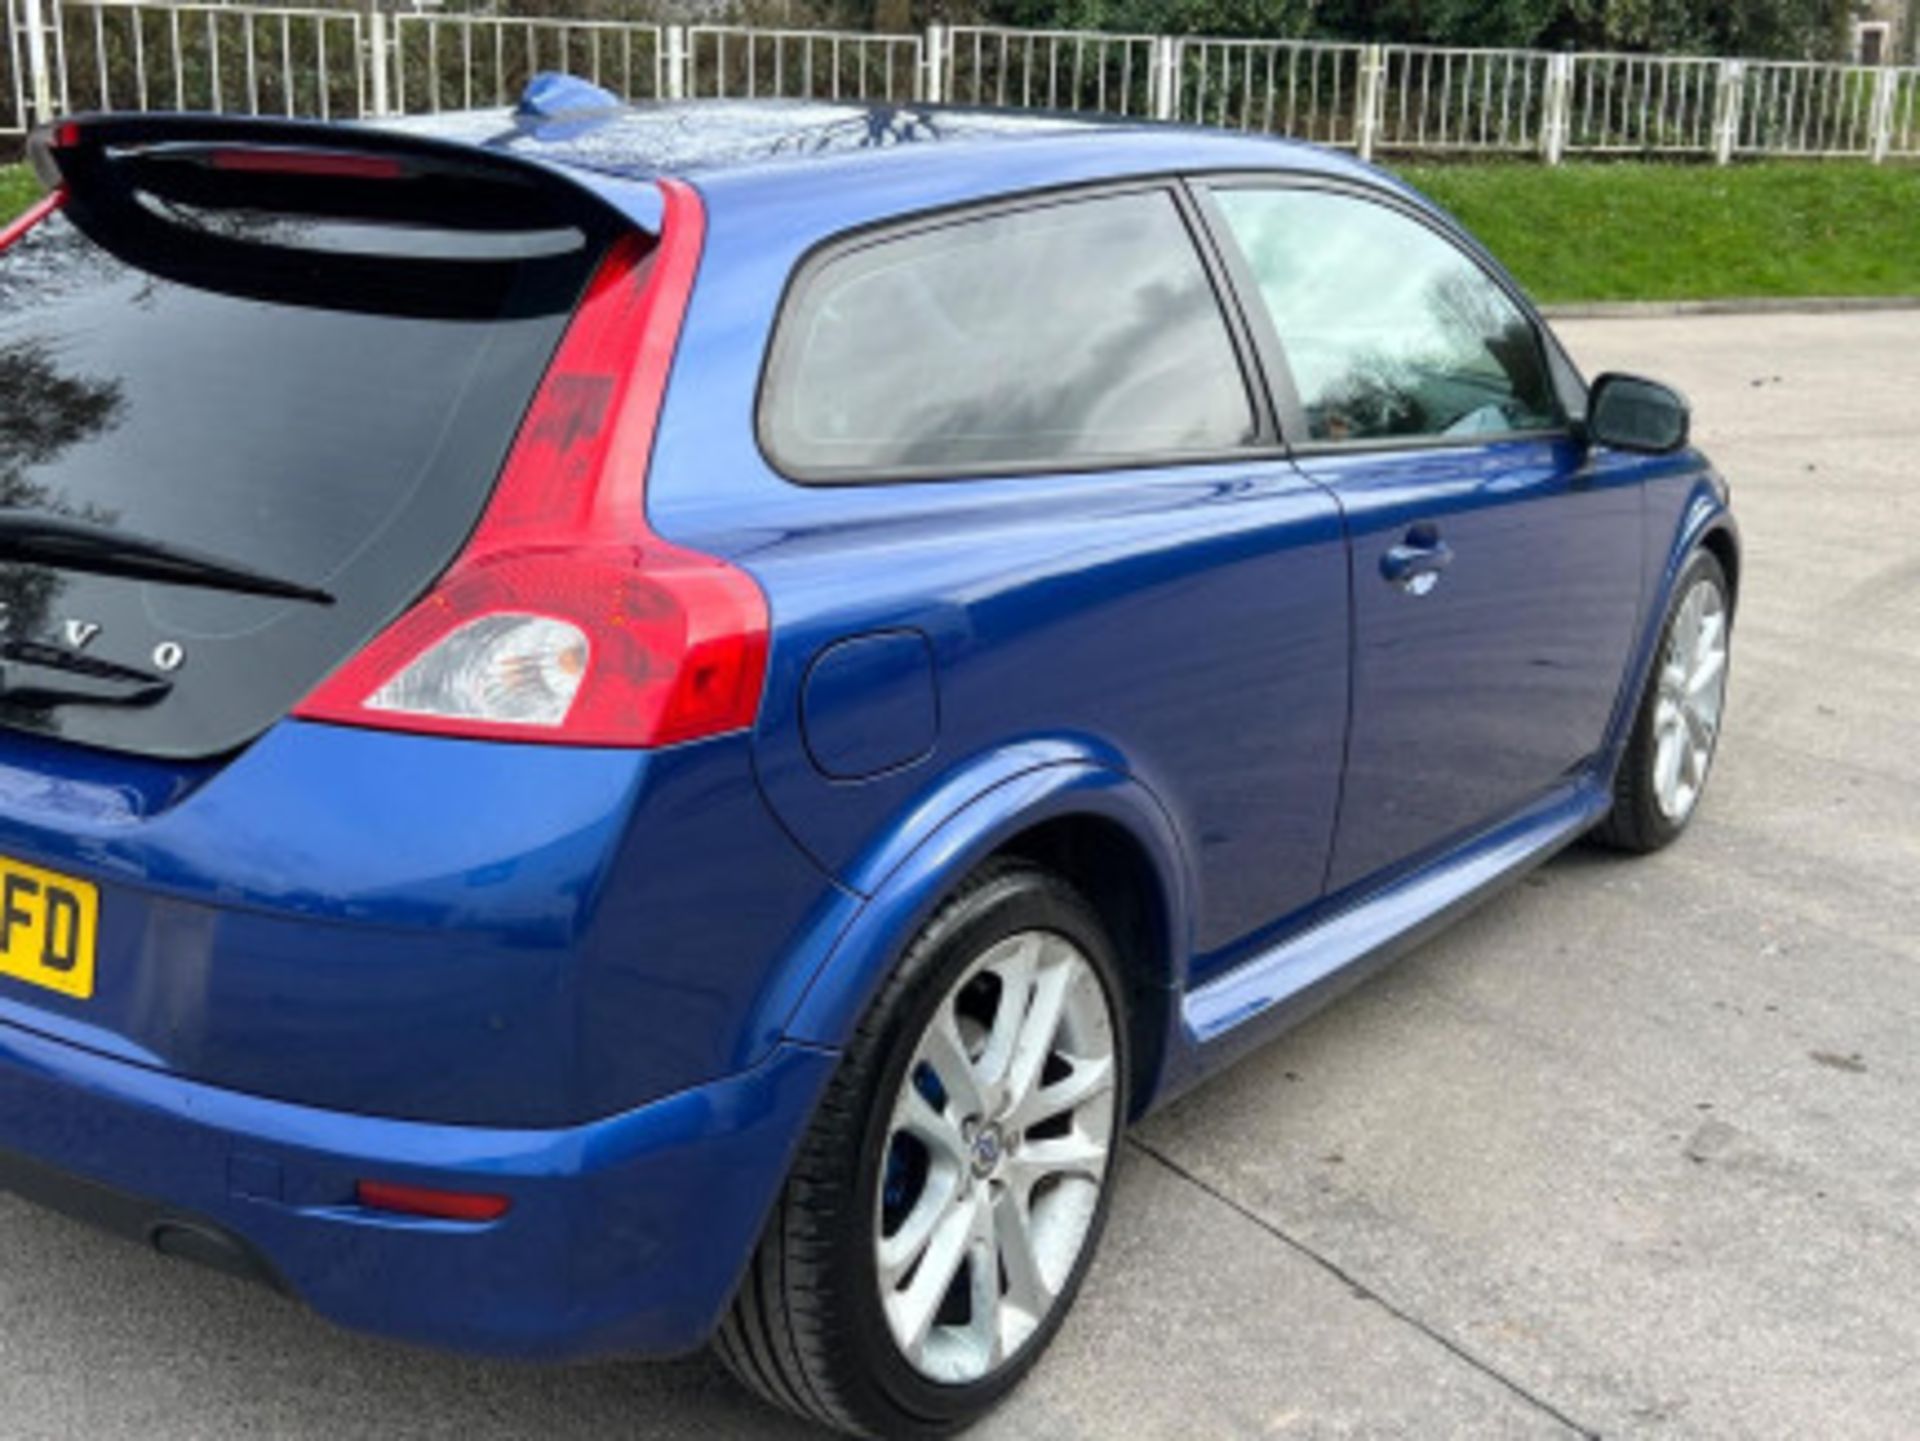 VOLVO C30 2.0D R-DESIGN SPORT 2DR - SPORTY AND LUXURIOUS COMPACT CAR >>--NO VAT ON HAMMER--<< - Image 28 of 103